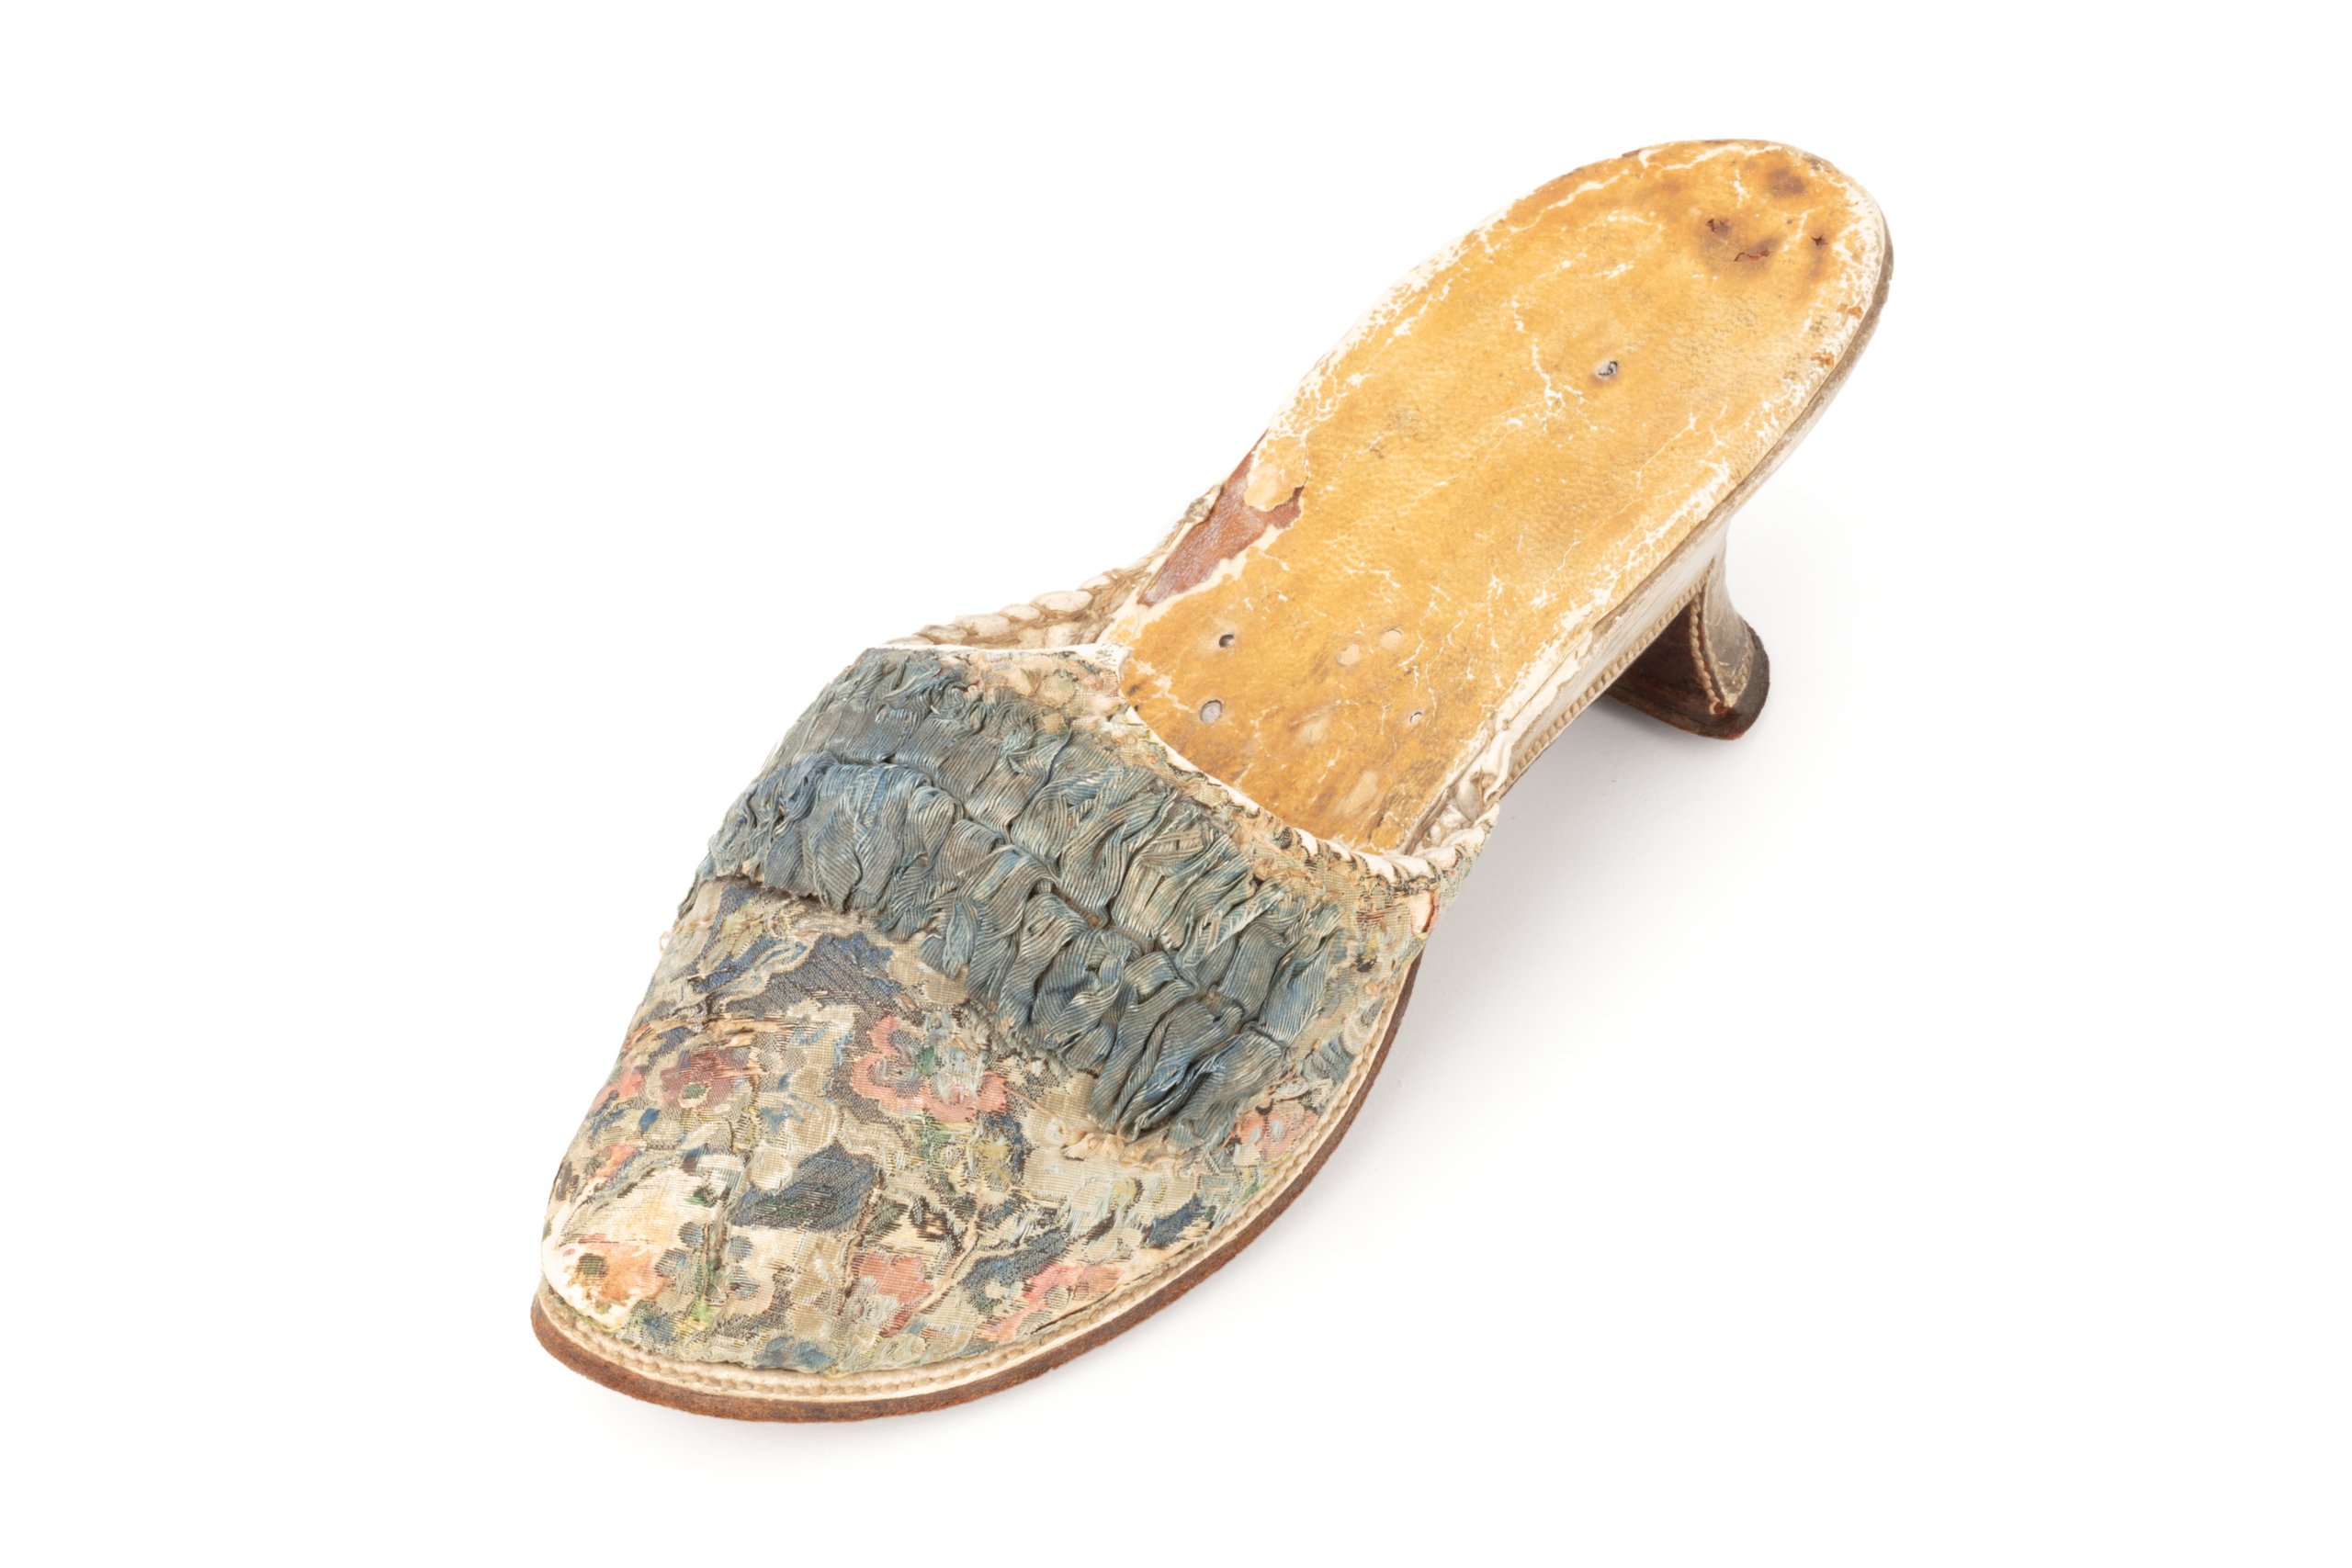 Mule shoe from the Joseph Box collection